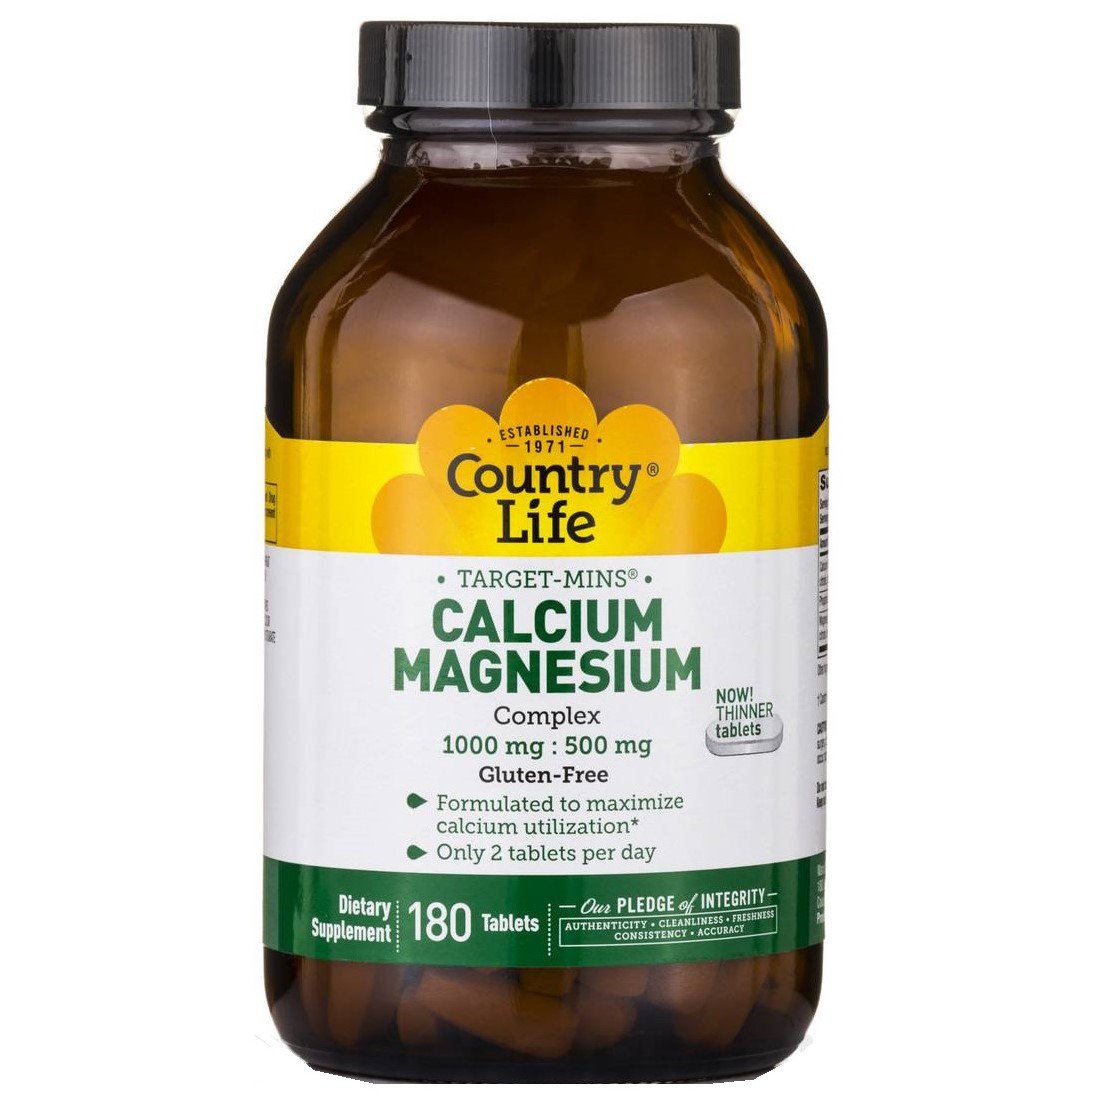 Country Life Target-Mins Calcium Magnesium Complex 180 tablets